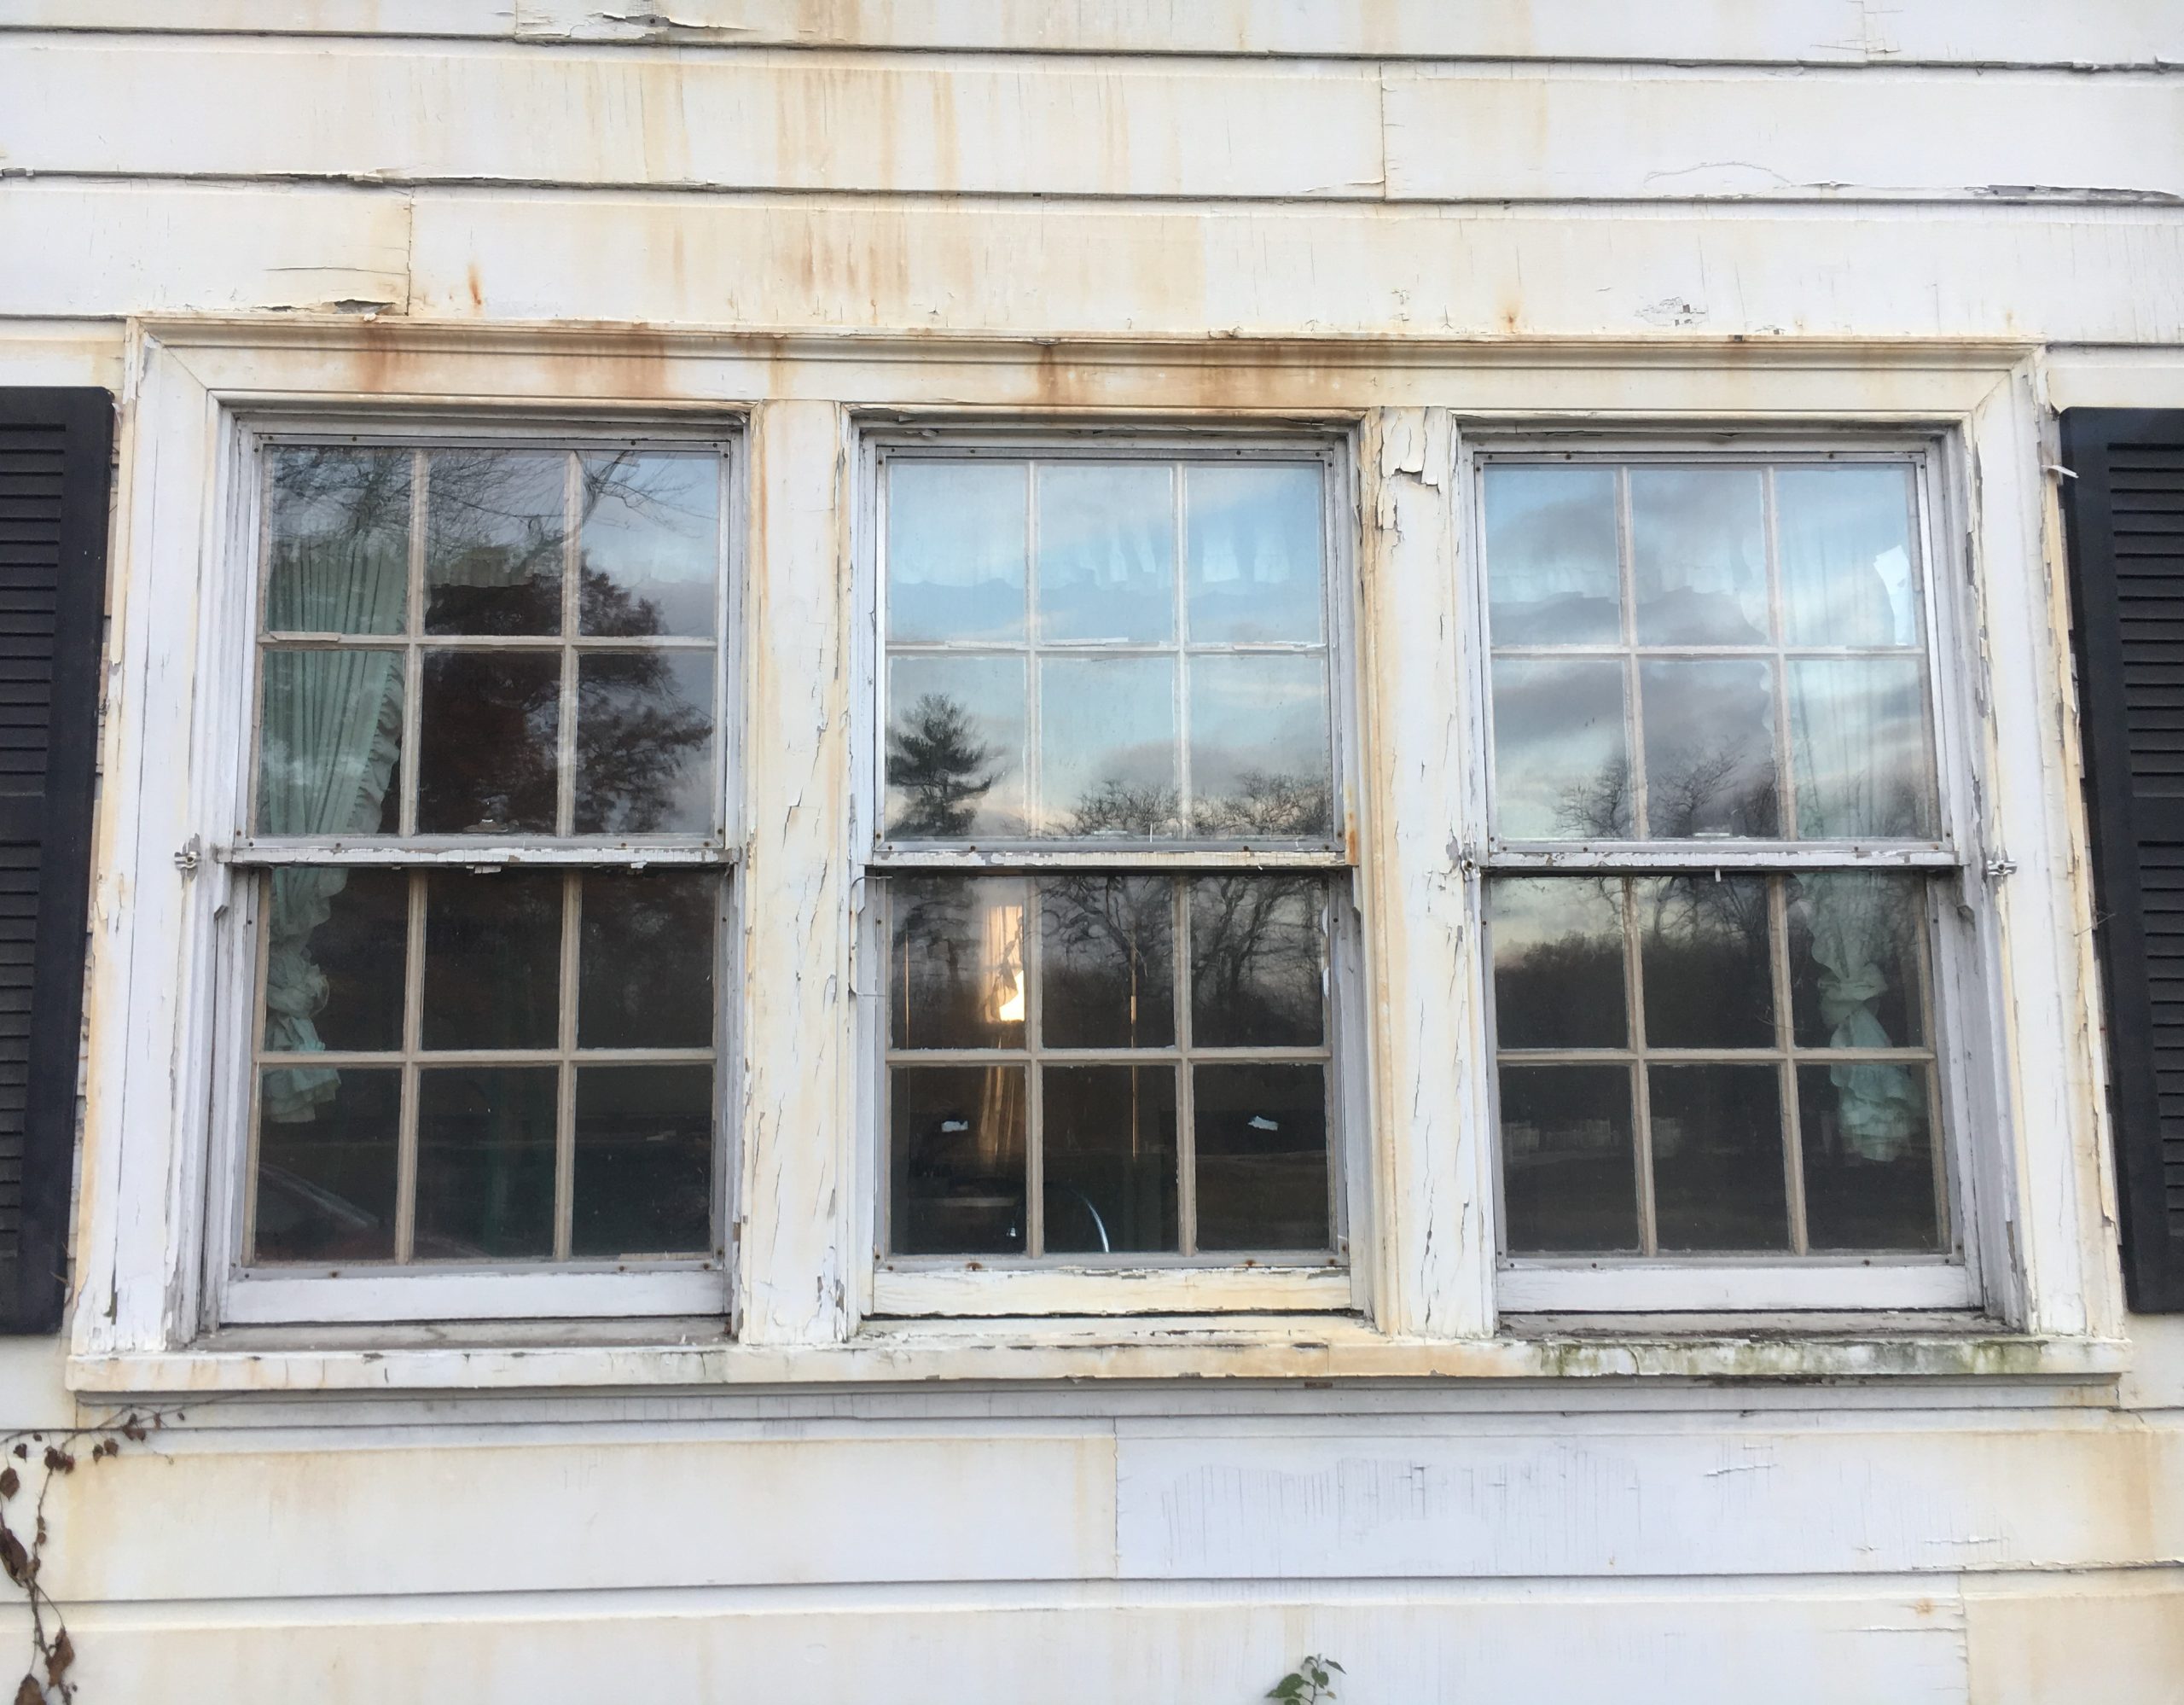 Window Repair Services and Glass Replacement in Palatine, IL